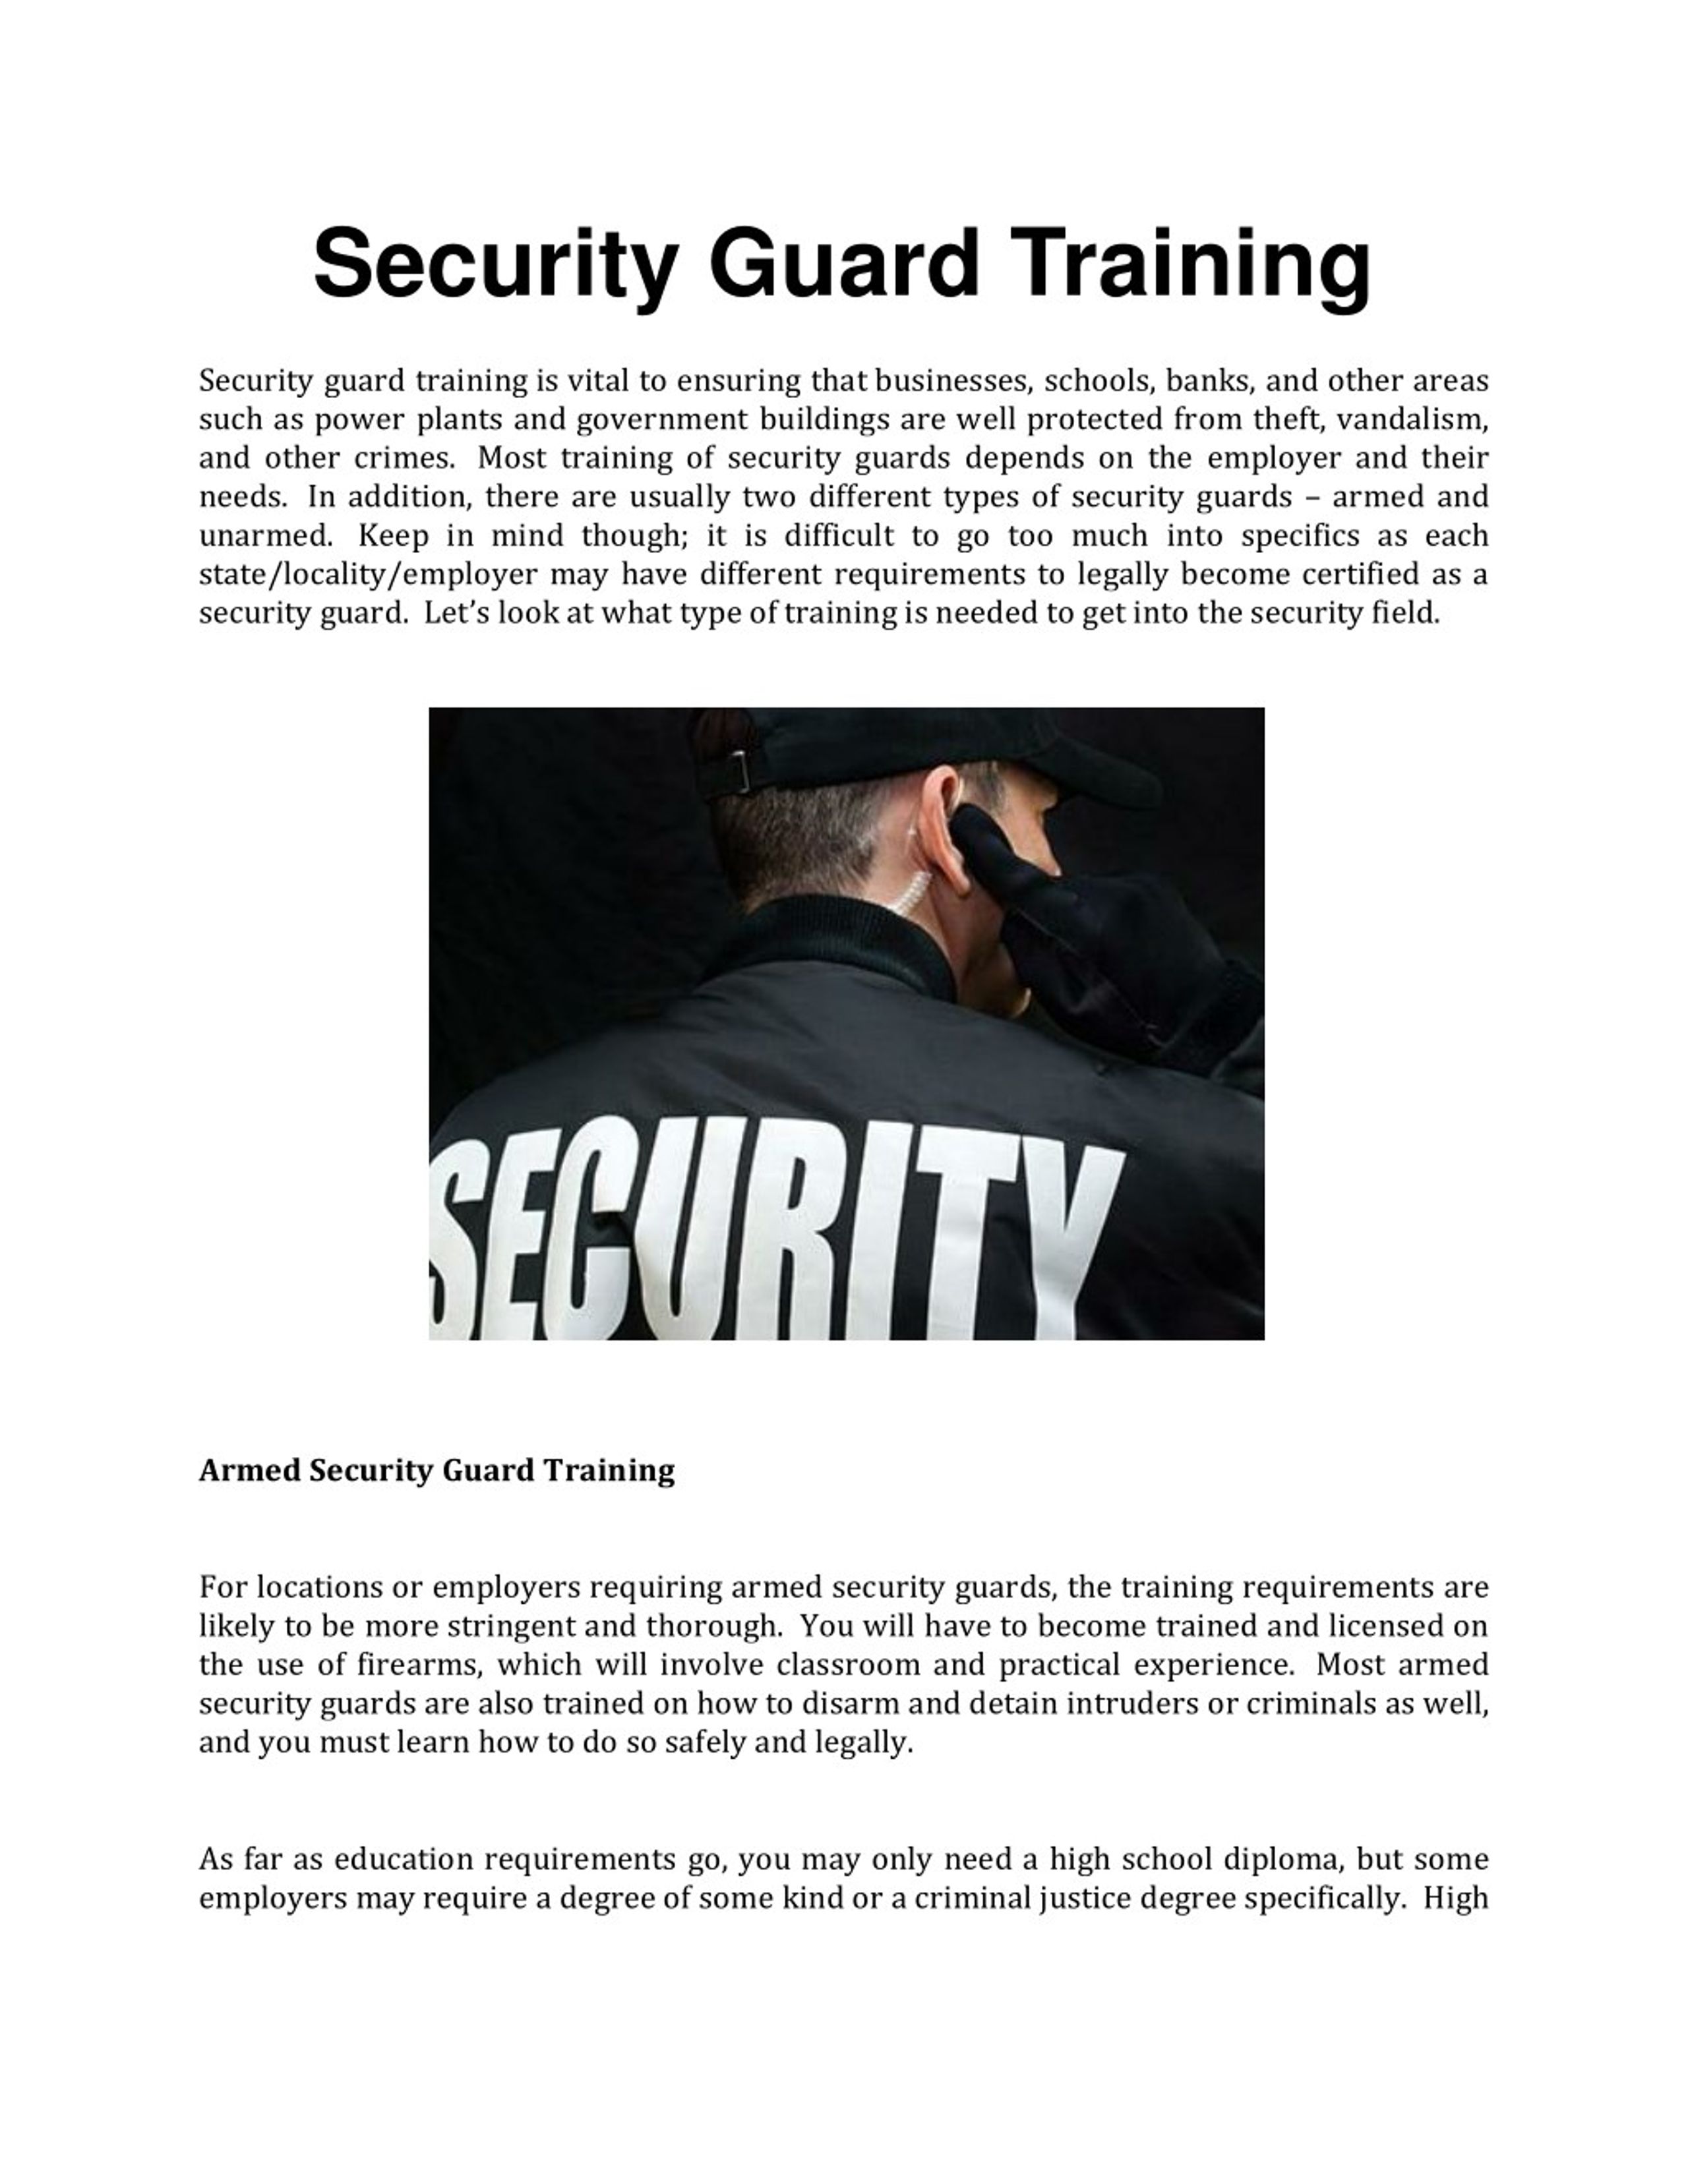 security guard training powerpoint presentation